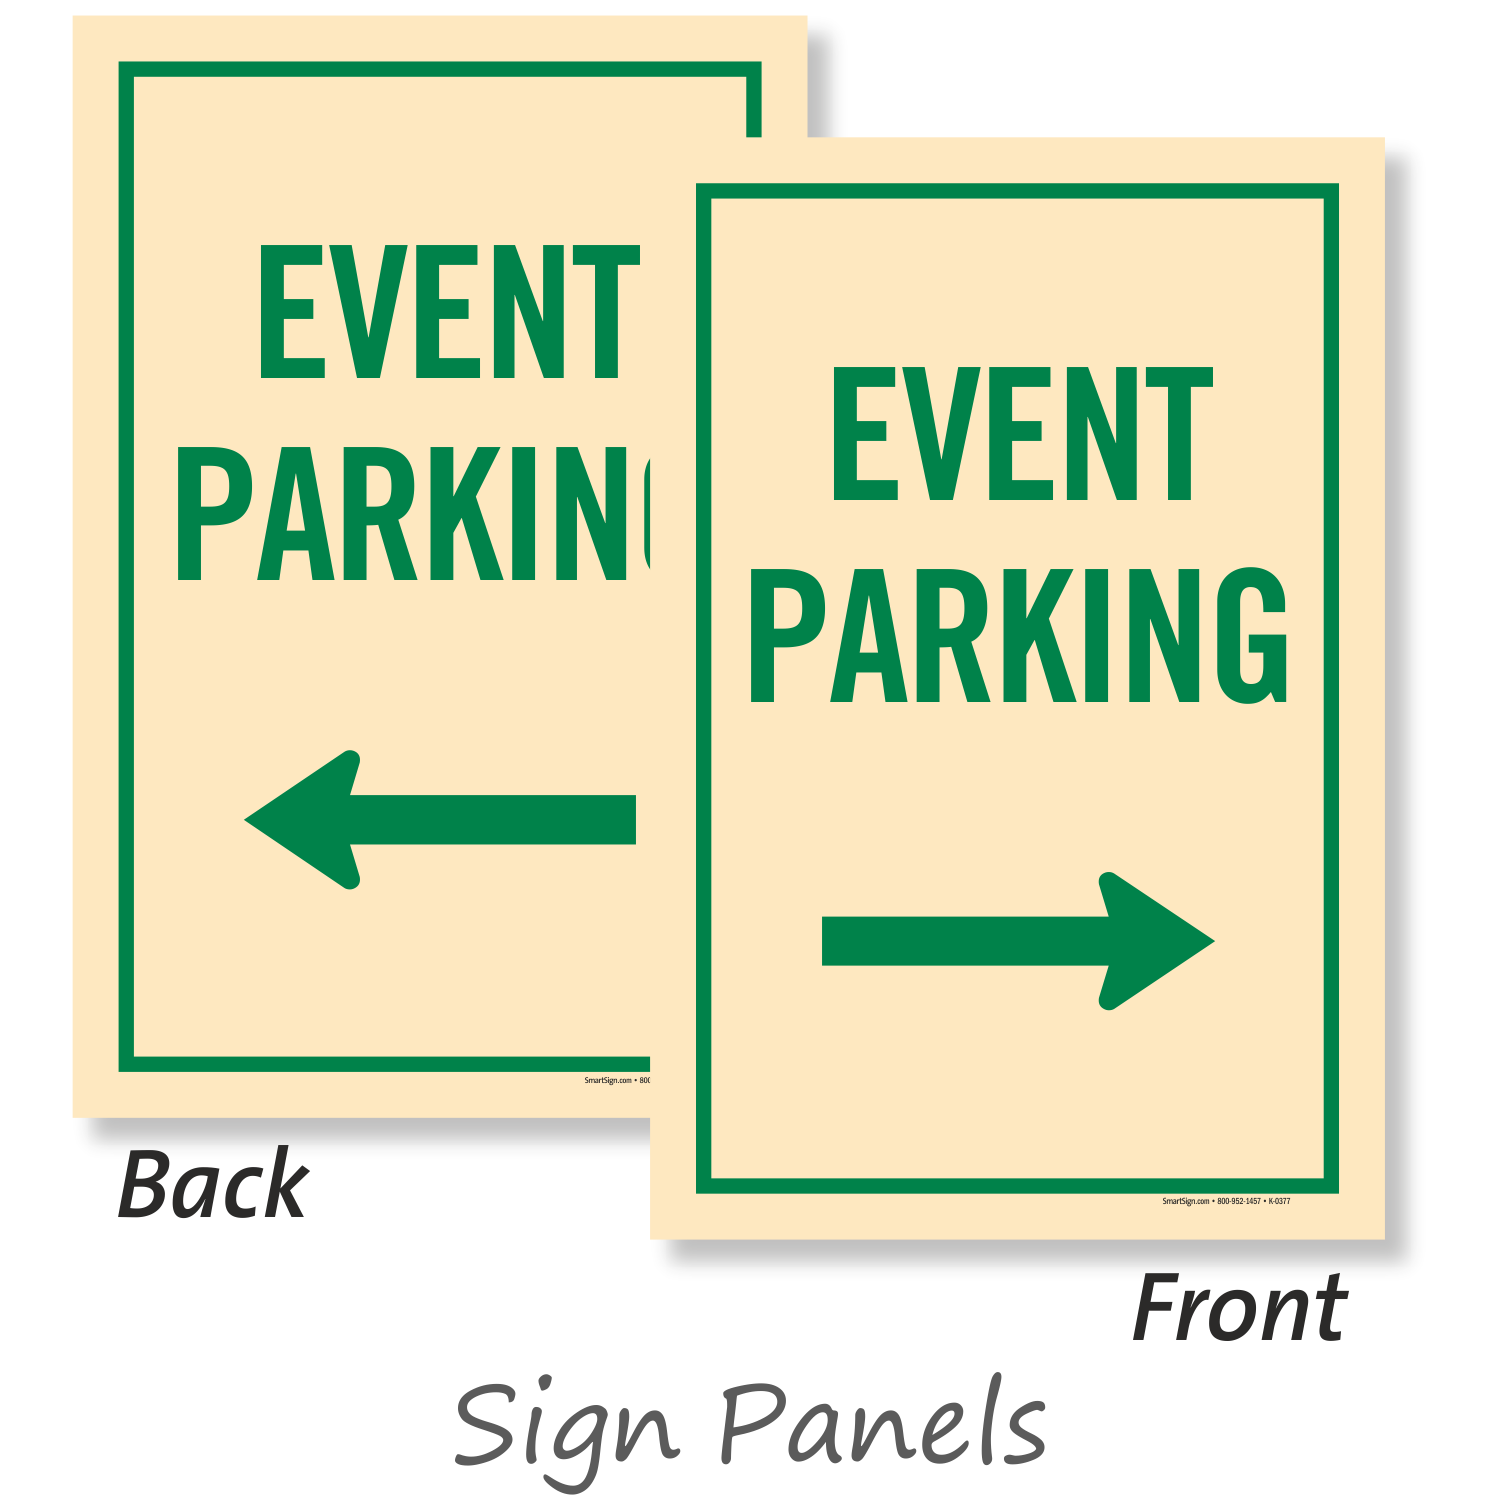 Made in UK BIG BOSS PARKING SIGN by Custom-Large Size-270mm x 205mm 